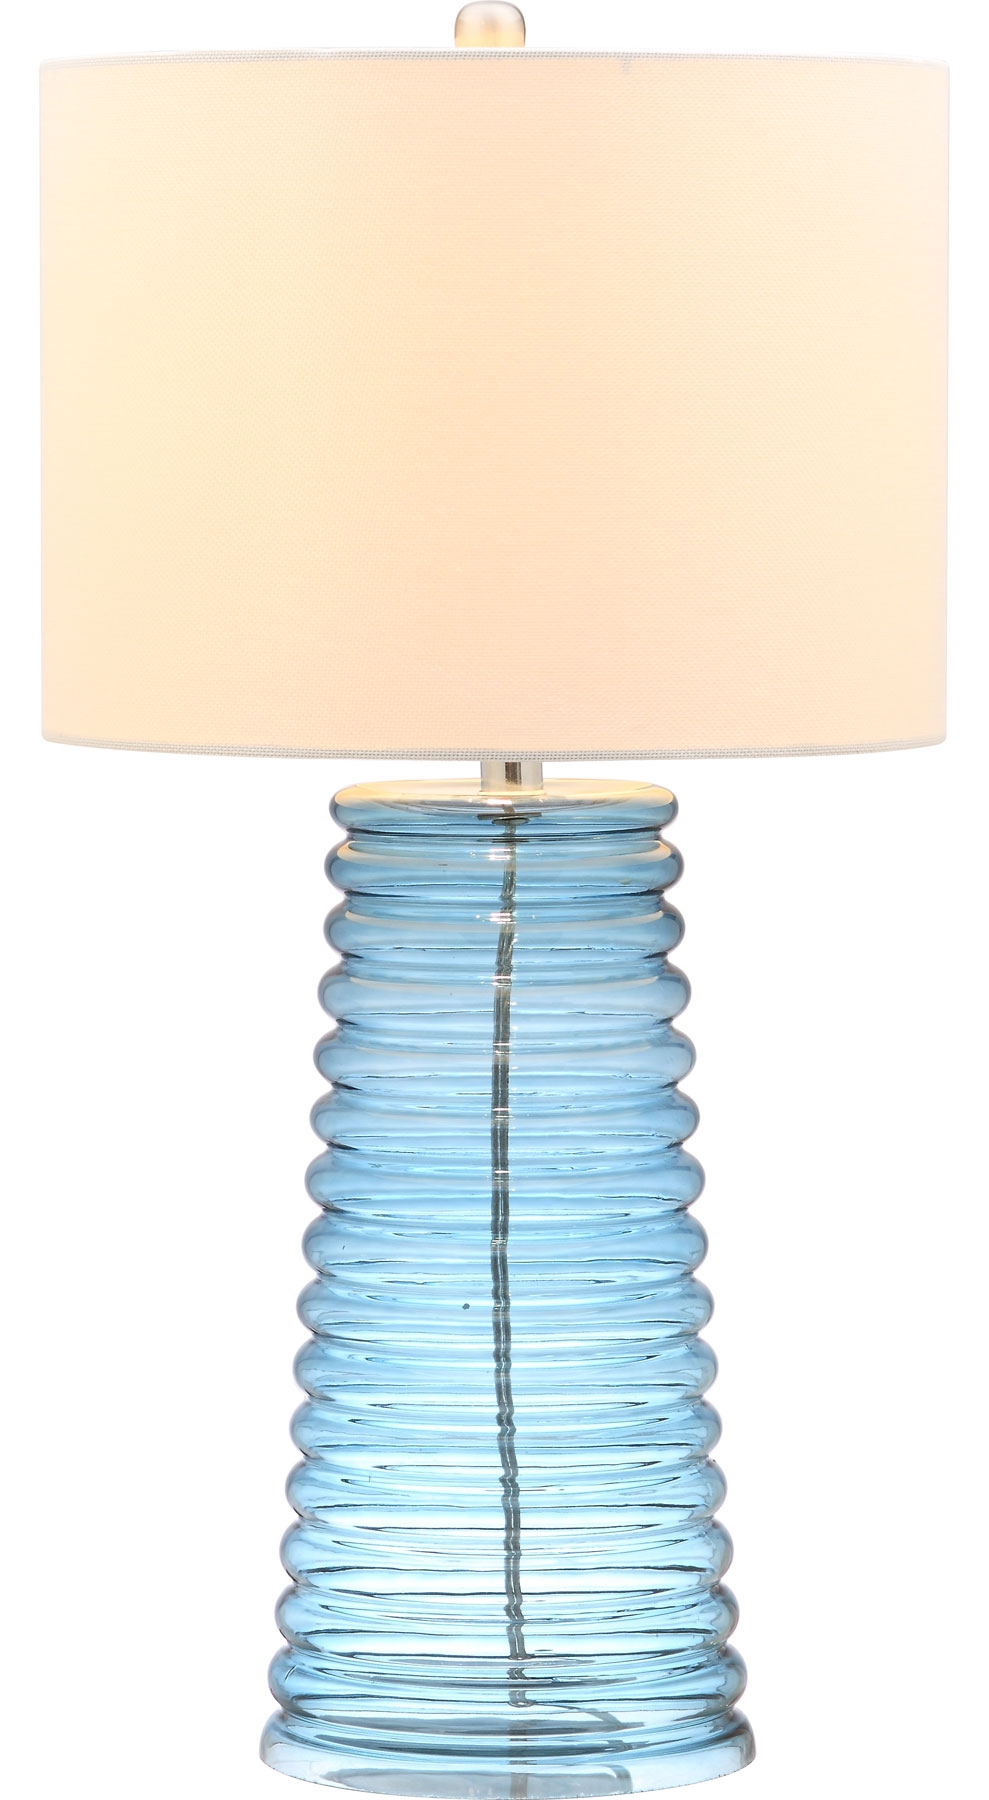 Yantley 28-Inch H Table Lamp - Blue - Arlo Home - Image 1